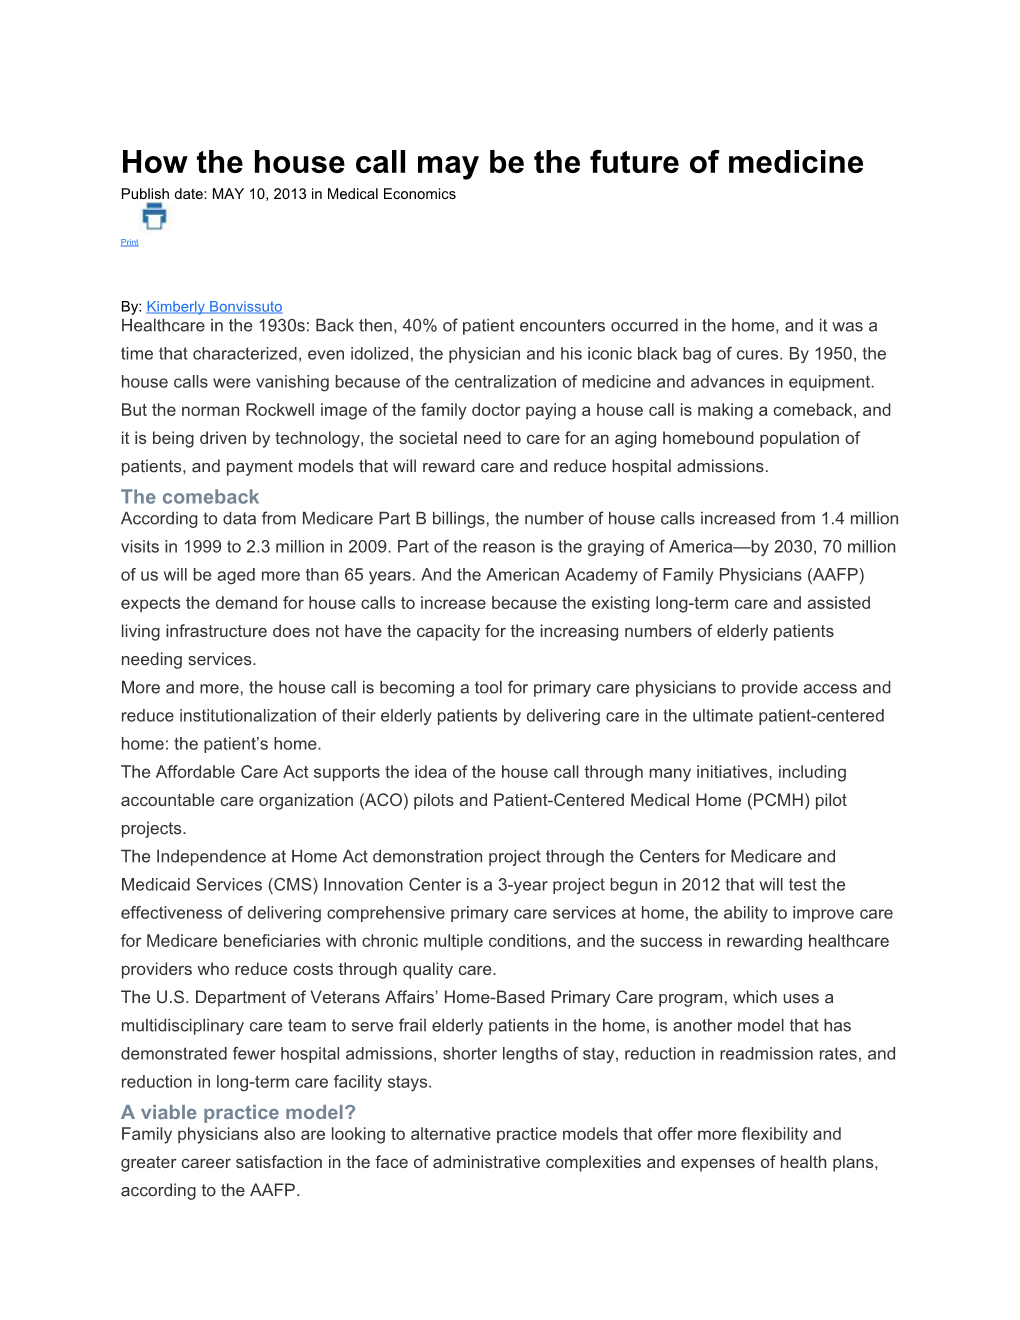 How the House Call May Be the Future of Medicine